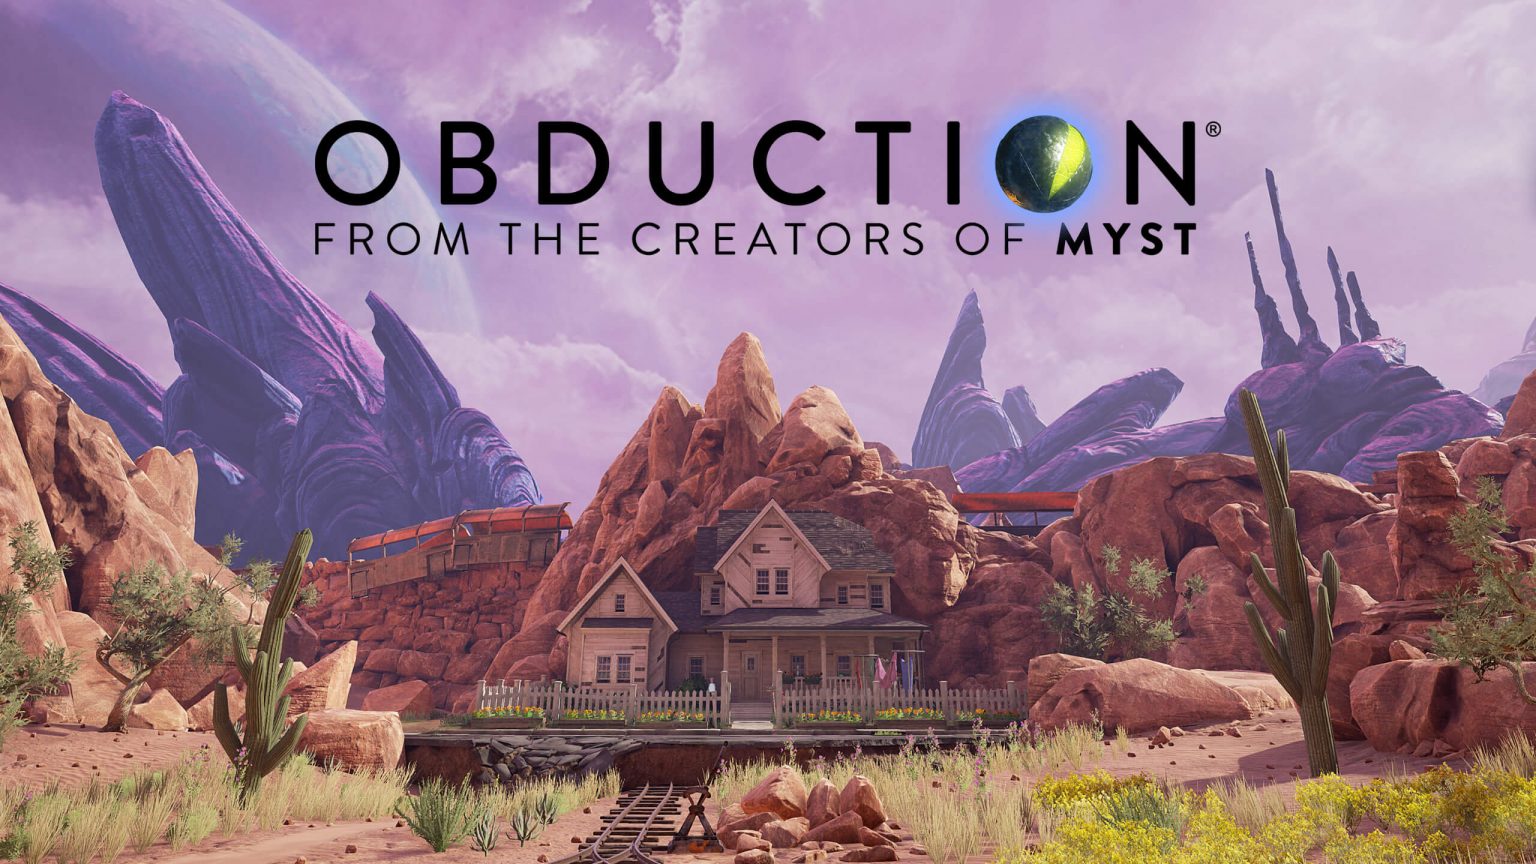 download obduction game for free